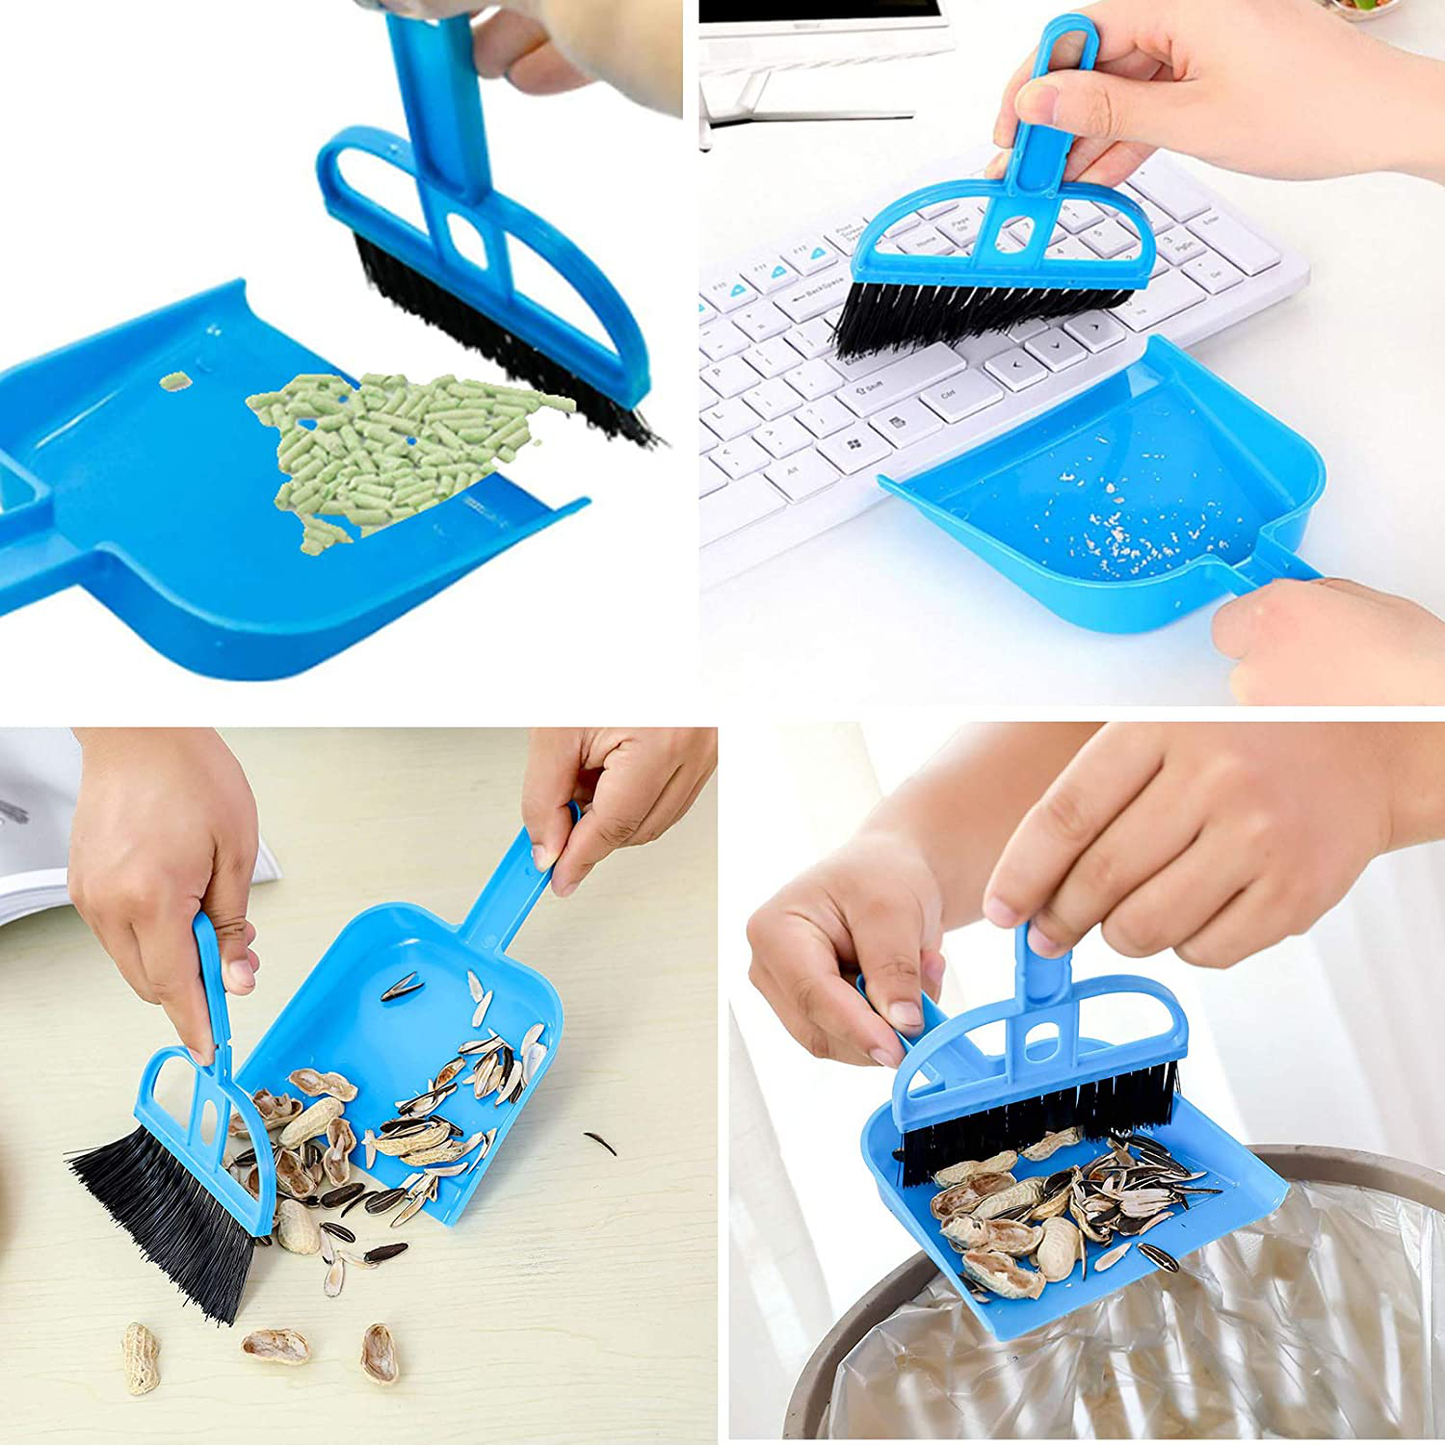 Hamiledyi Small Pet Cage Cleaner Set, Disposable Rabbit Cage Liner, Guinea Pig Playpen Mini Hand Broom Dustpan, Cleaning Brush Sand Scooper Floor for Rabbit Chinchilla Hedgehogs Animals & Pet Supplies > Pet Supplies > Small Animal Supplies > Small Animal Bedding Hamiledyi   